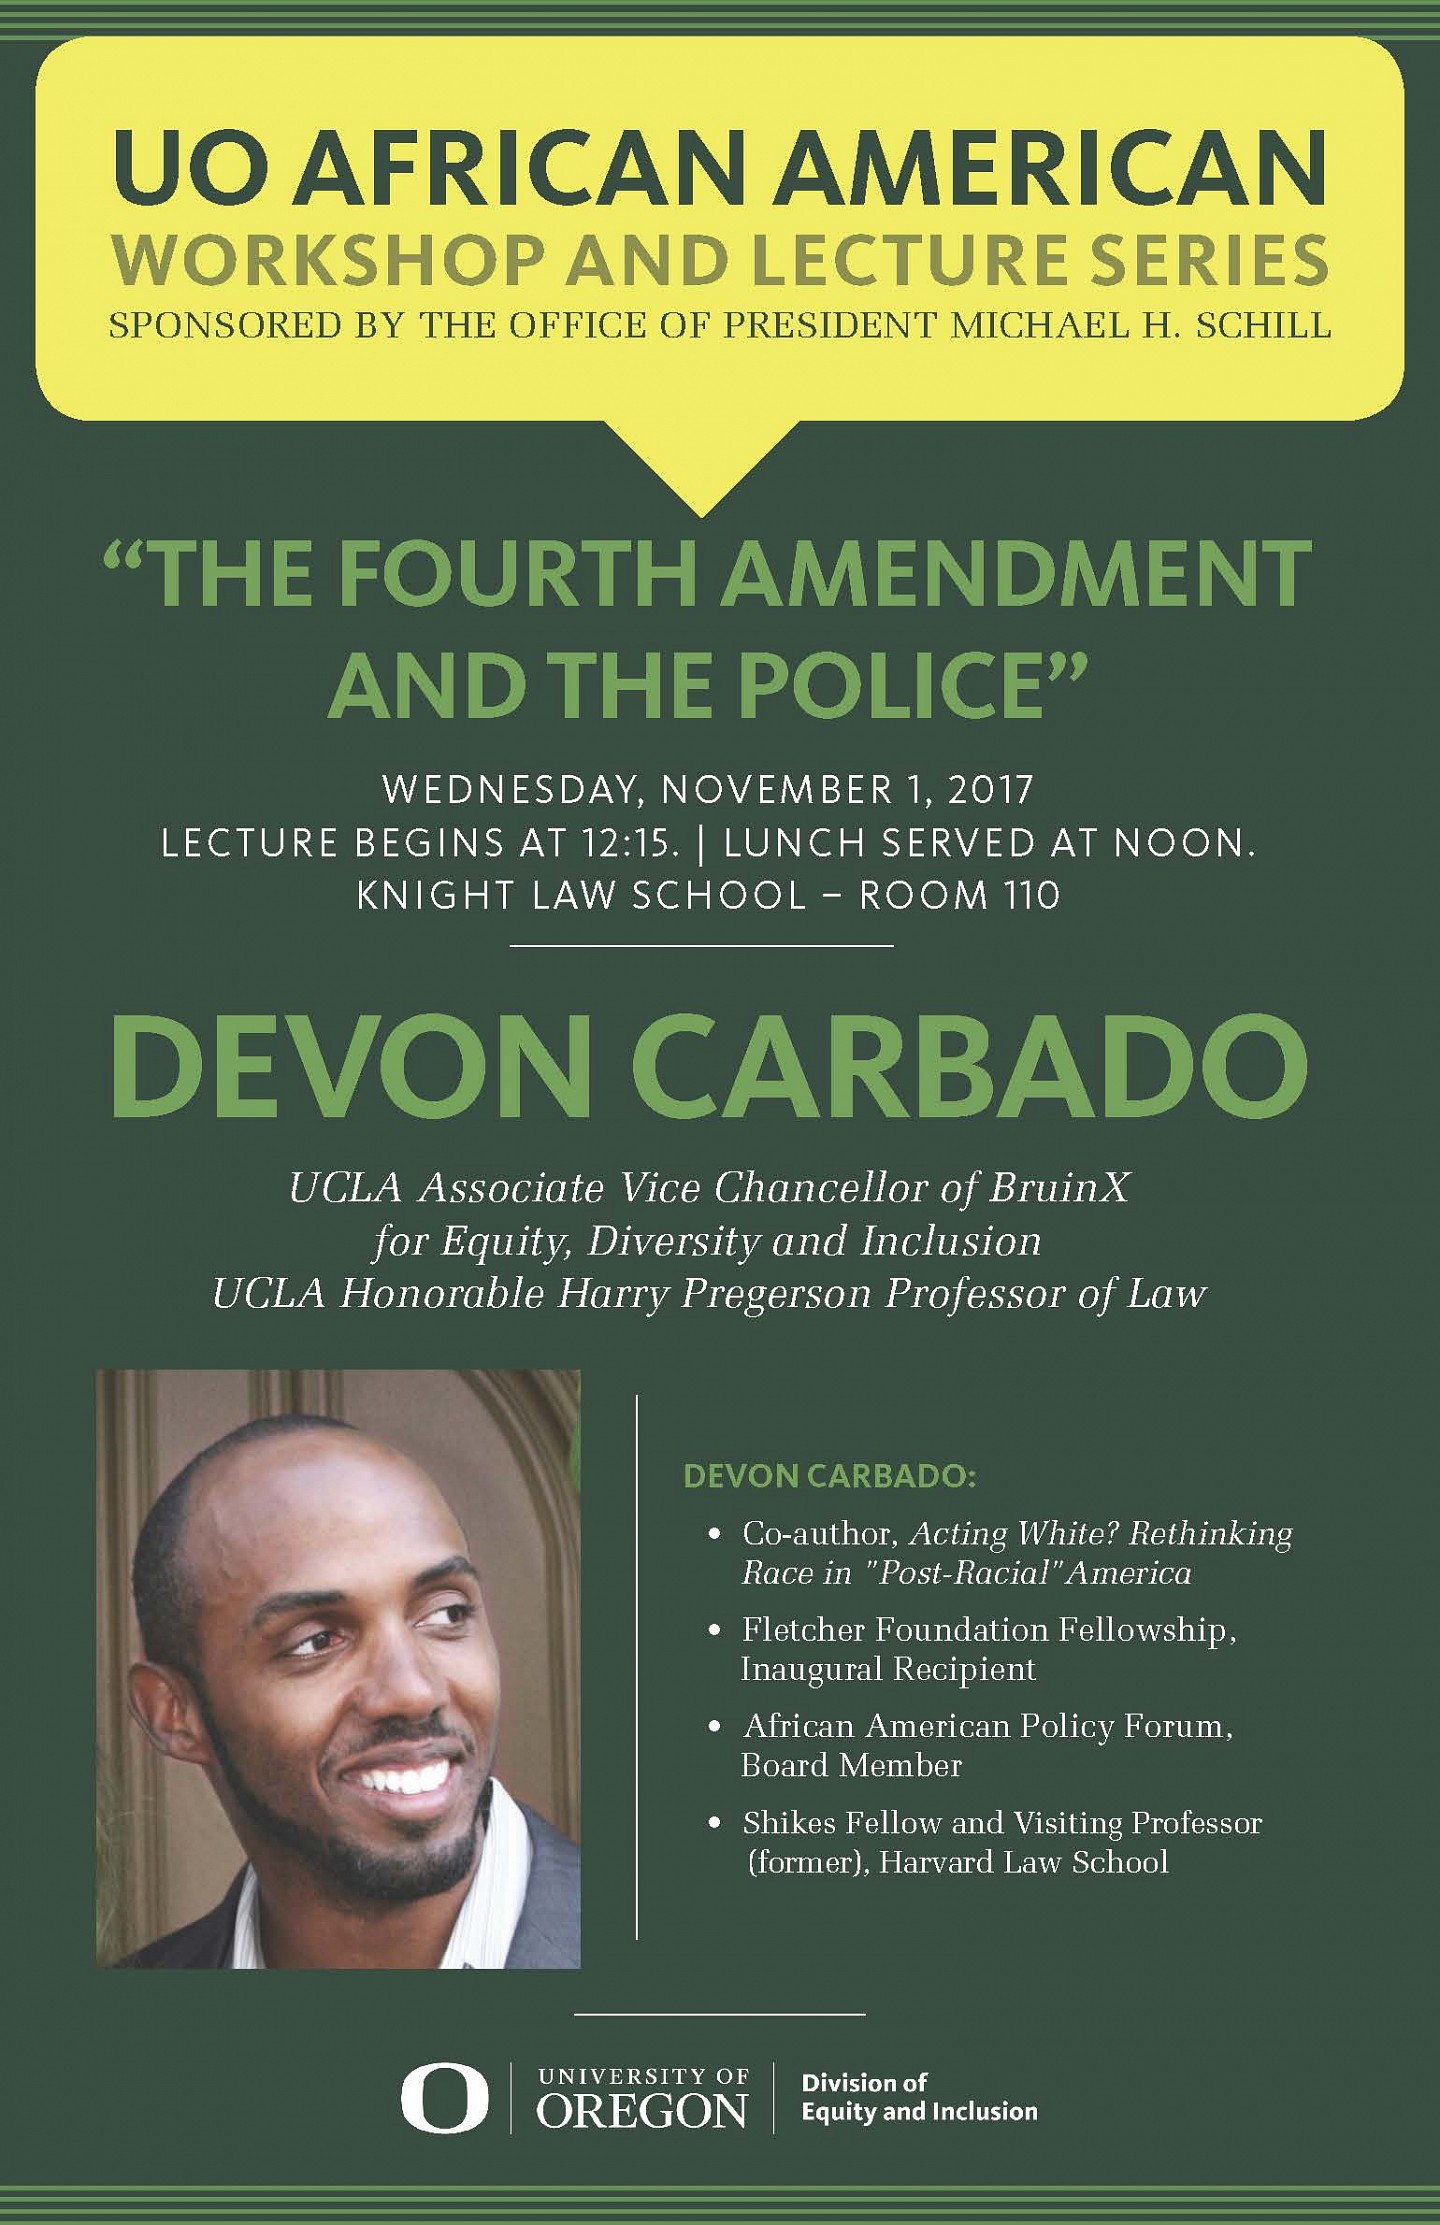 Devon Carbado, "The Fourth Amendment and the Police." African American Speaker Series, NOVEMBER 1, 2017 | 12:15 - 1:45 PM KNIGHT LAW SCHOOL – ROOM 110